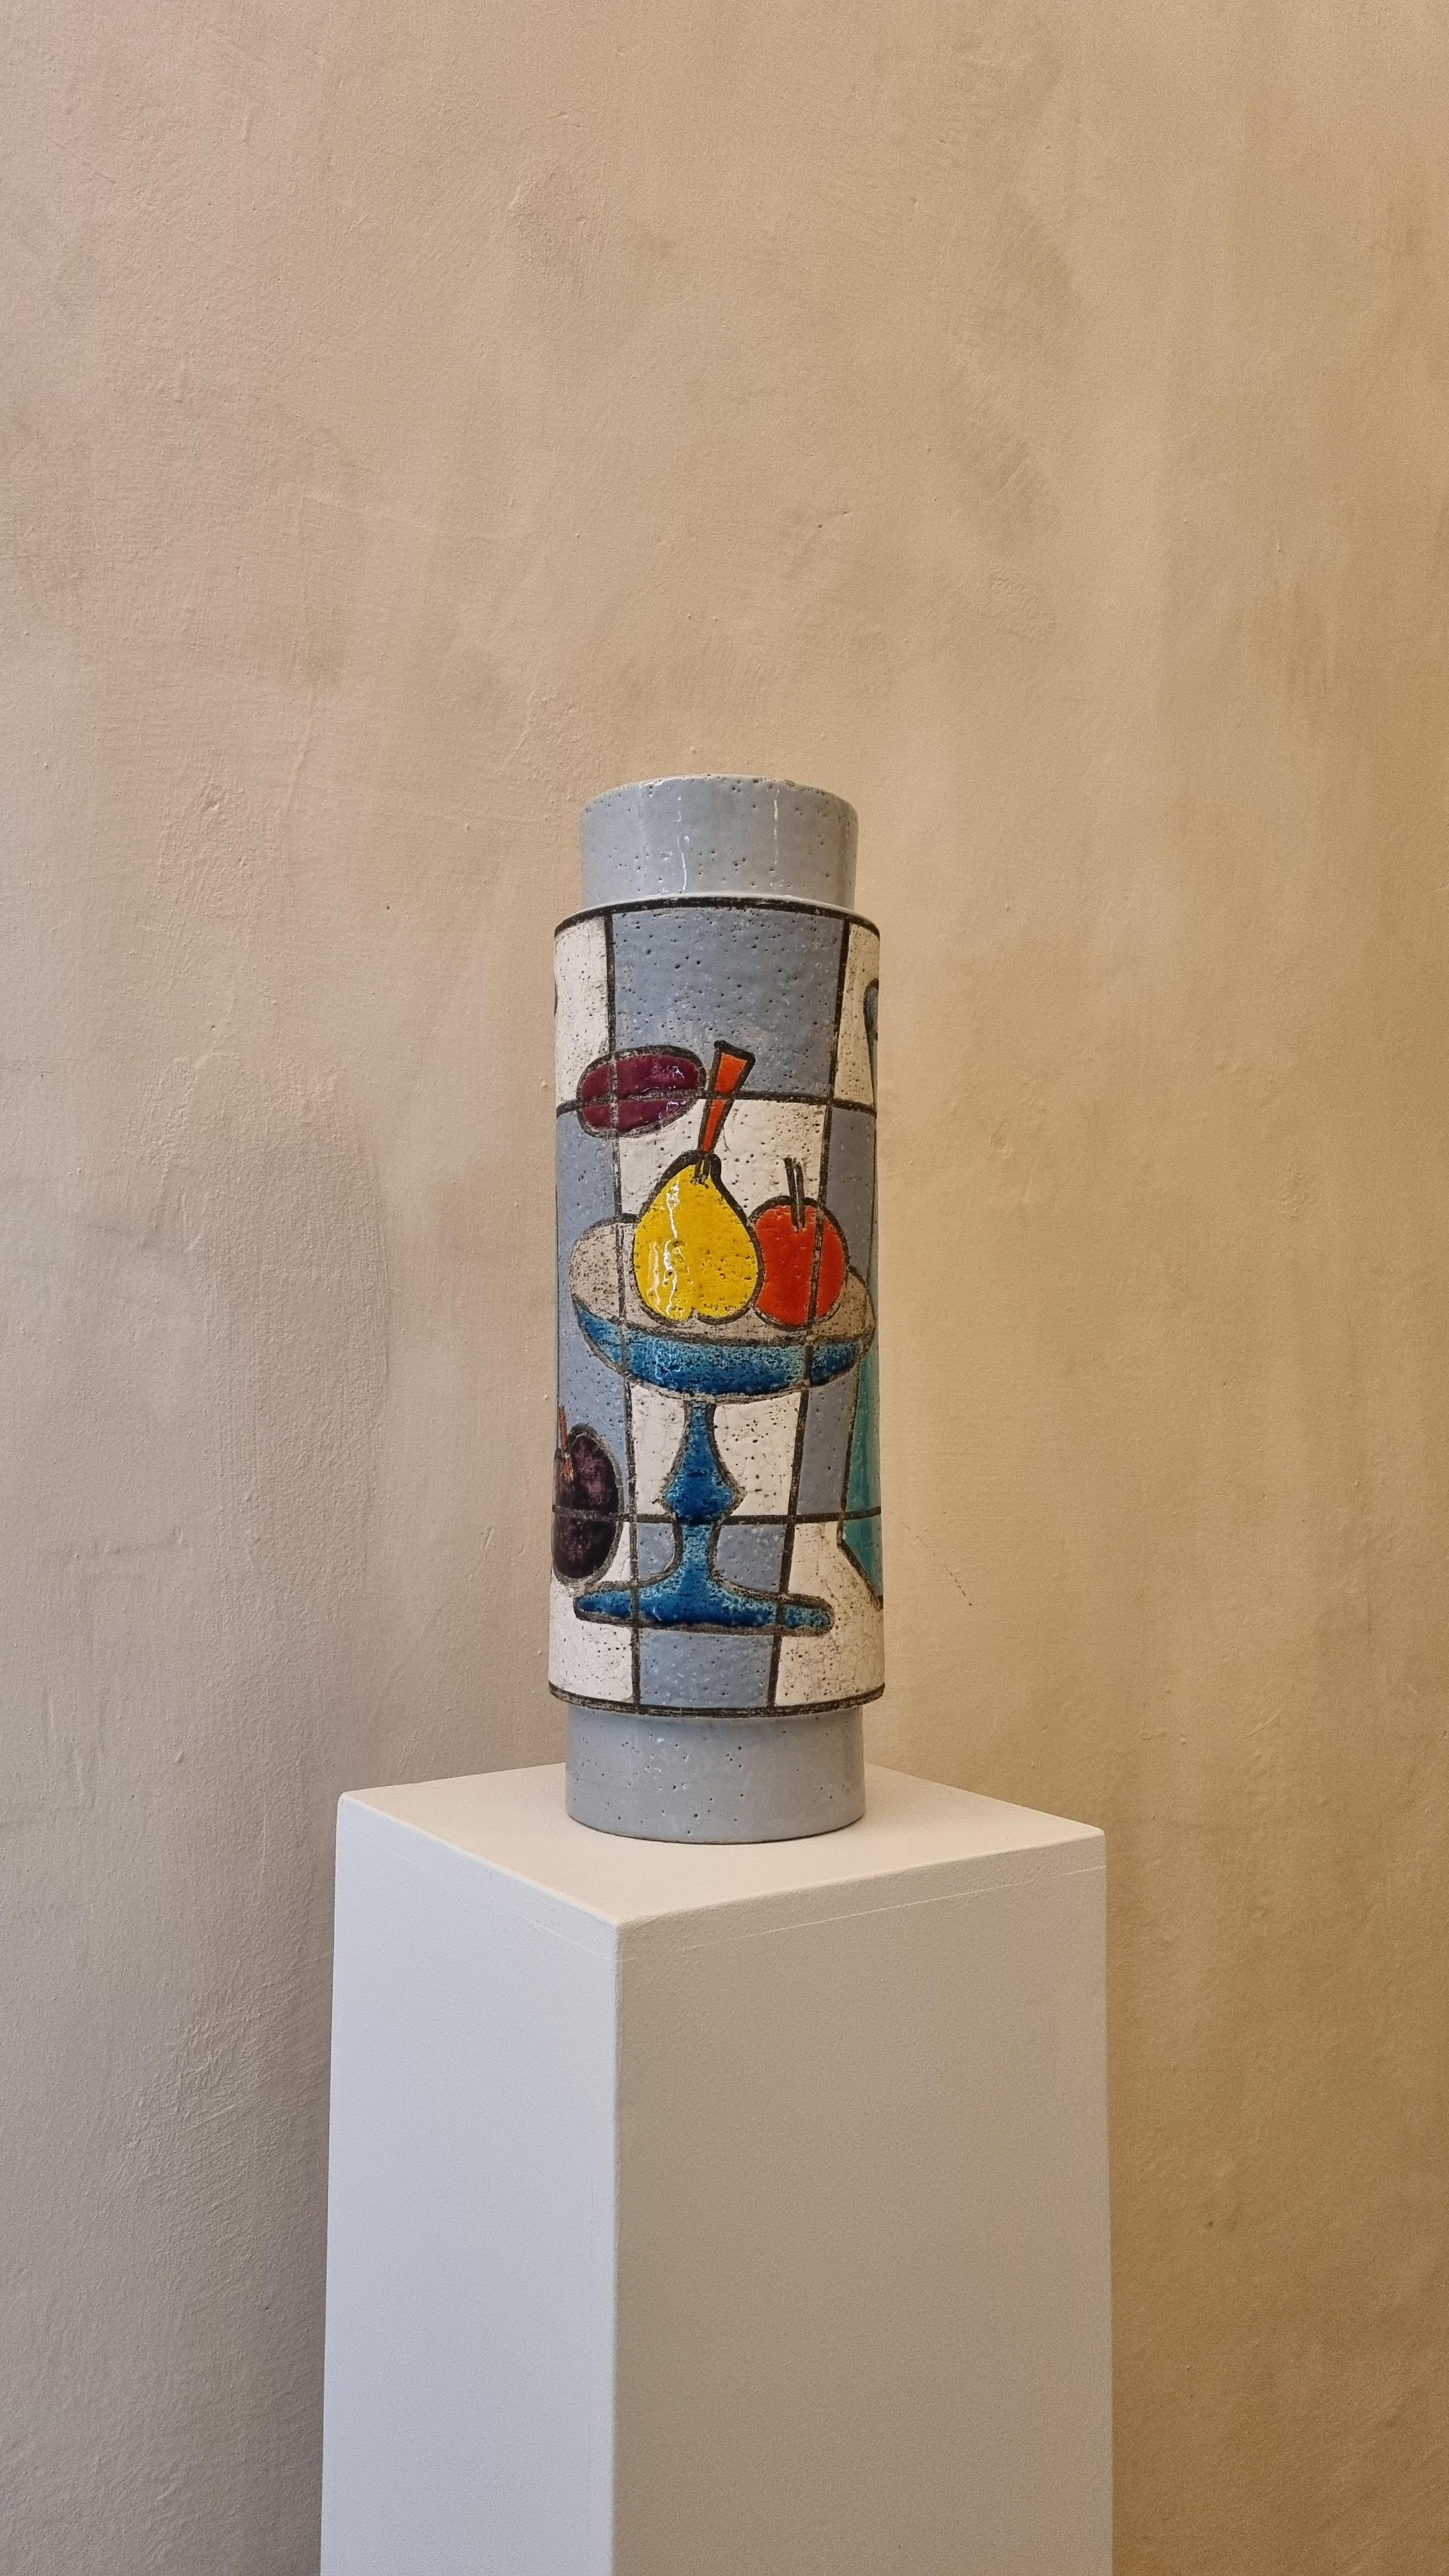 Ceramic lamp holder by Aldo Londi for Ceramiche Bitossi Montelupo, 1970 .
Glazed ceramic, hand painted, signed.
This rare model  was produced in a limited series of  pieces,
Each work created by Bitossi follows a very complex working process, both